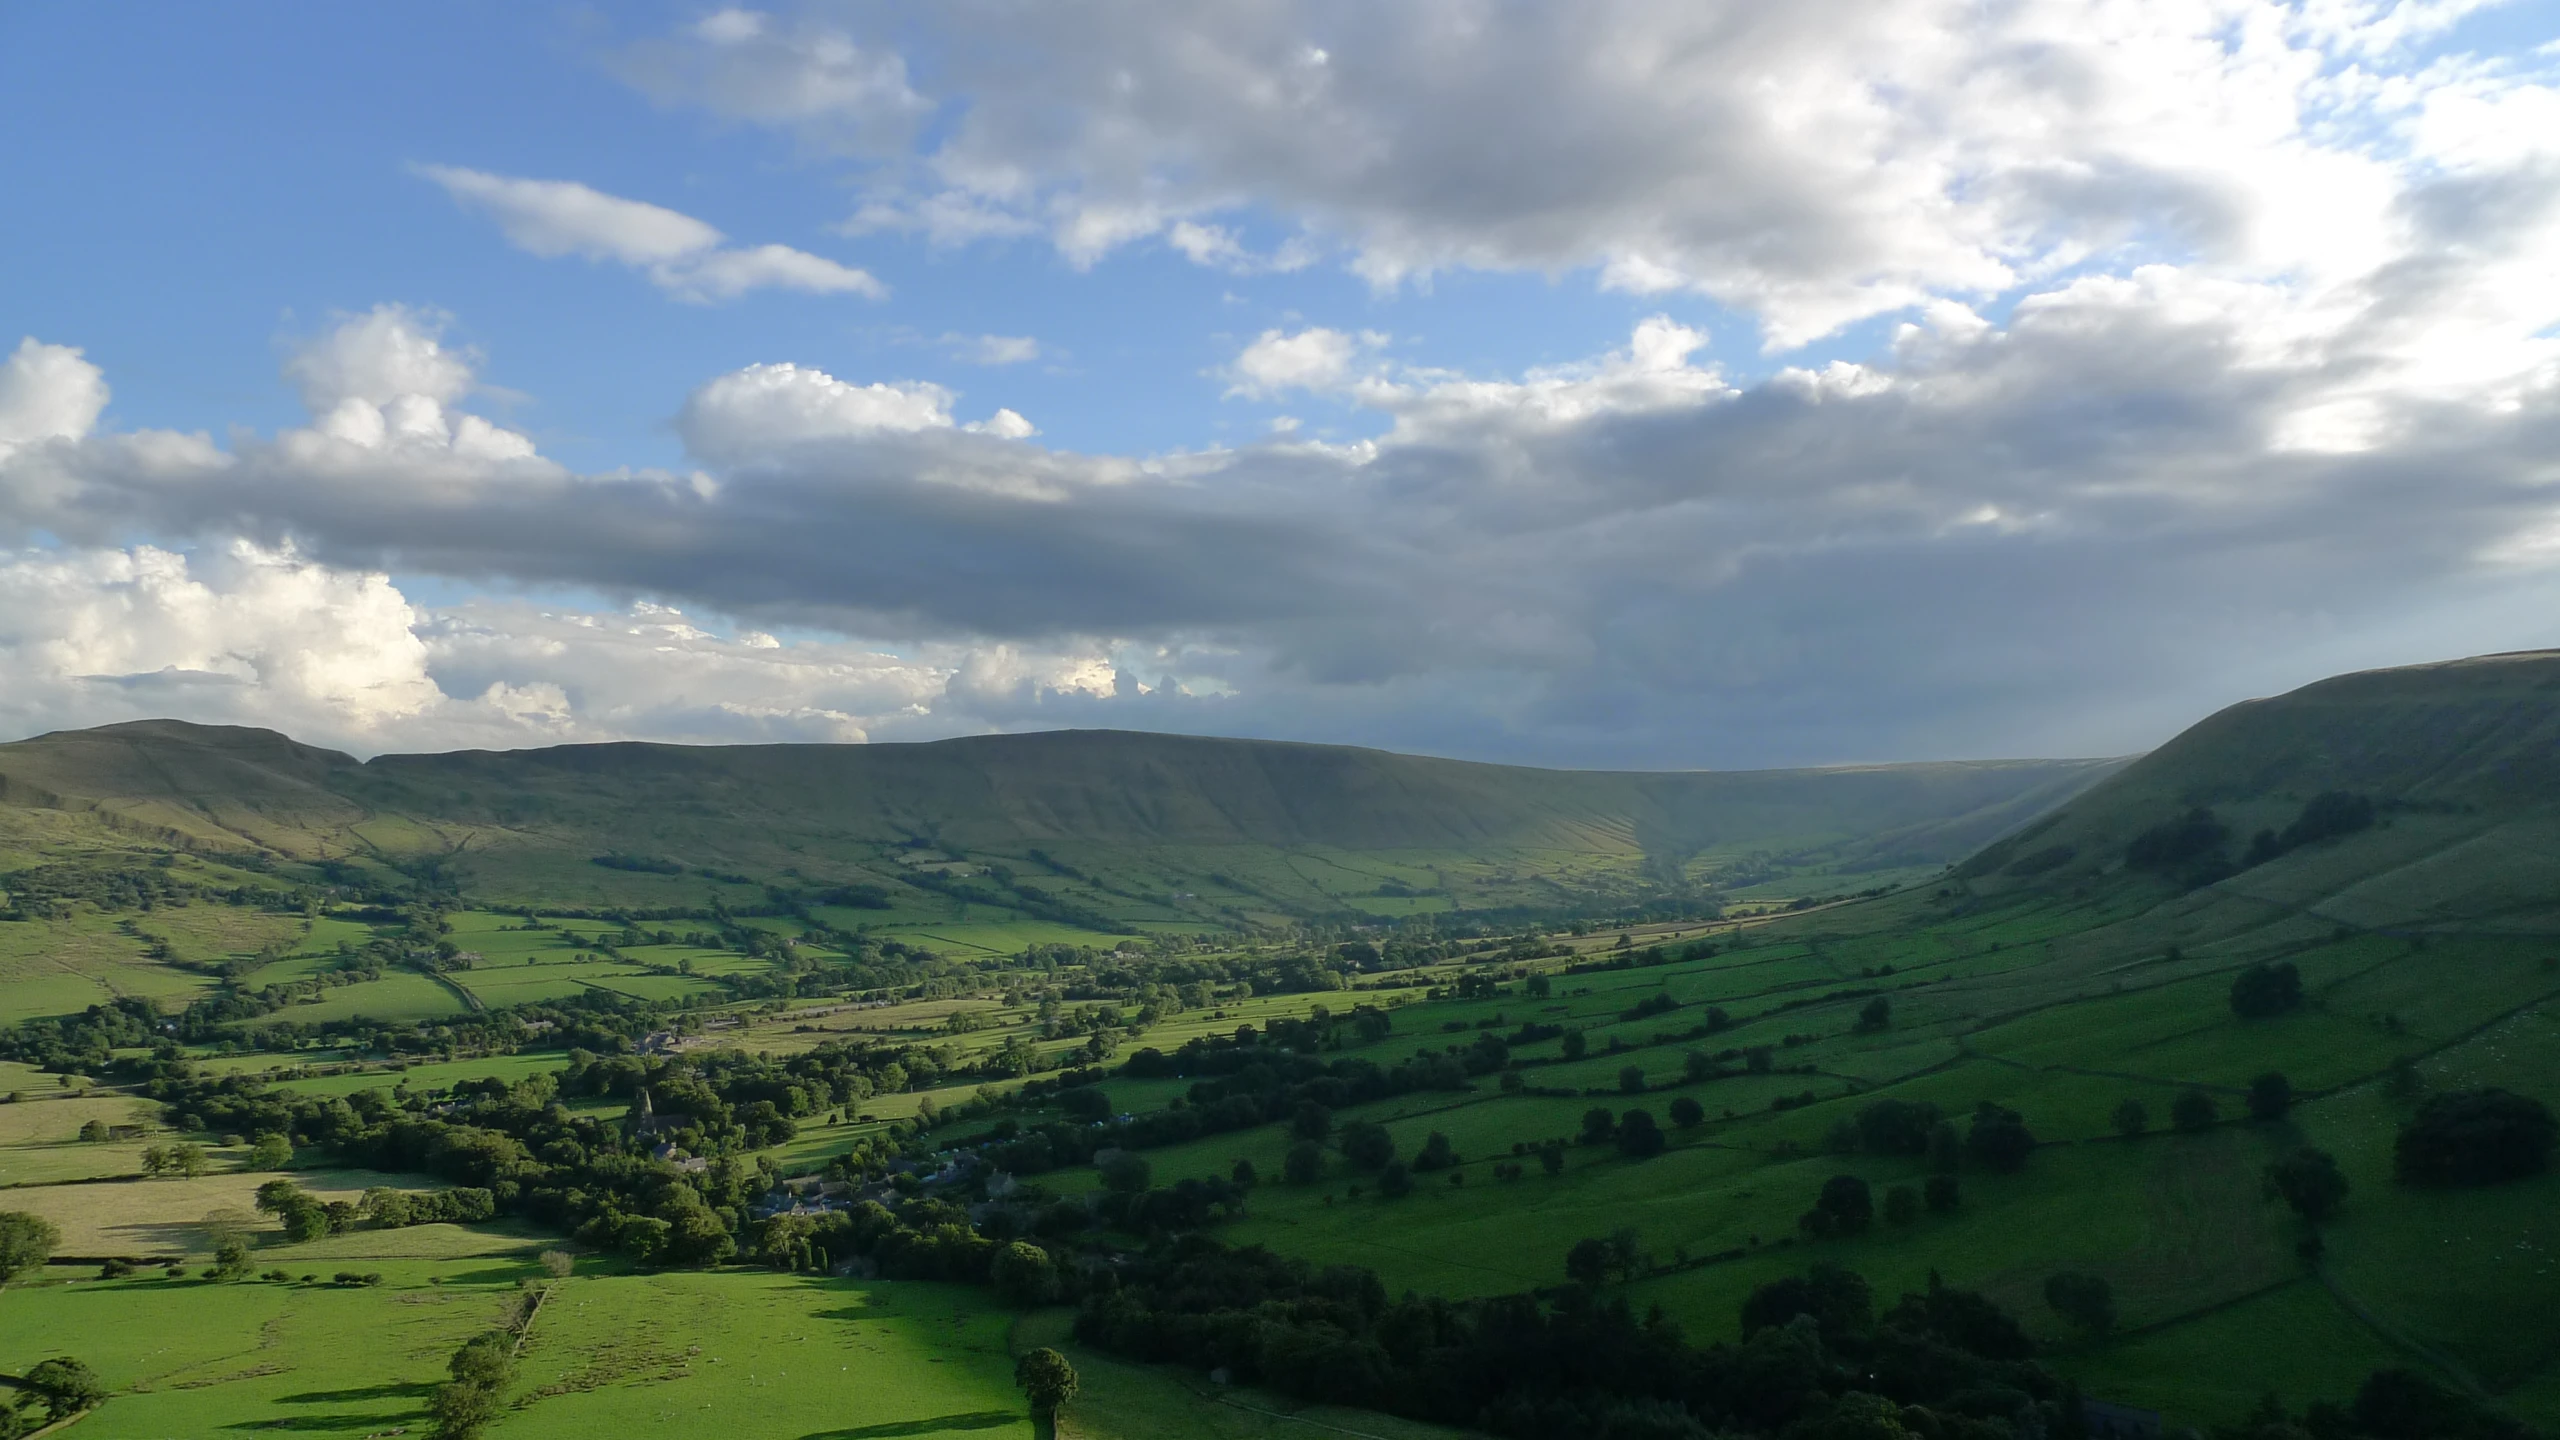 green valley with rolling hills and trees under a blue cloudy sky